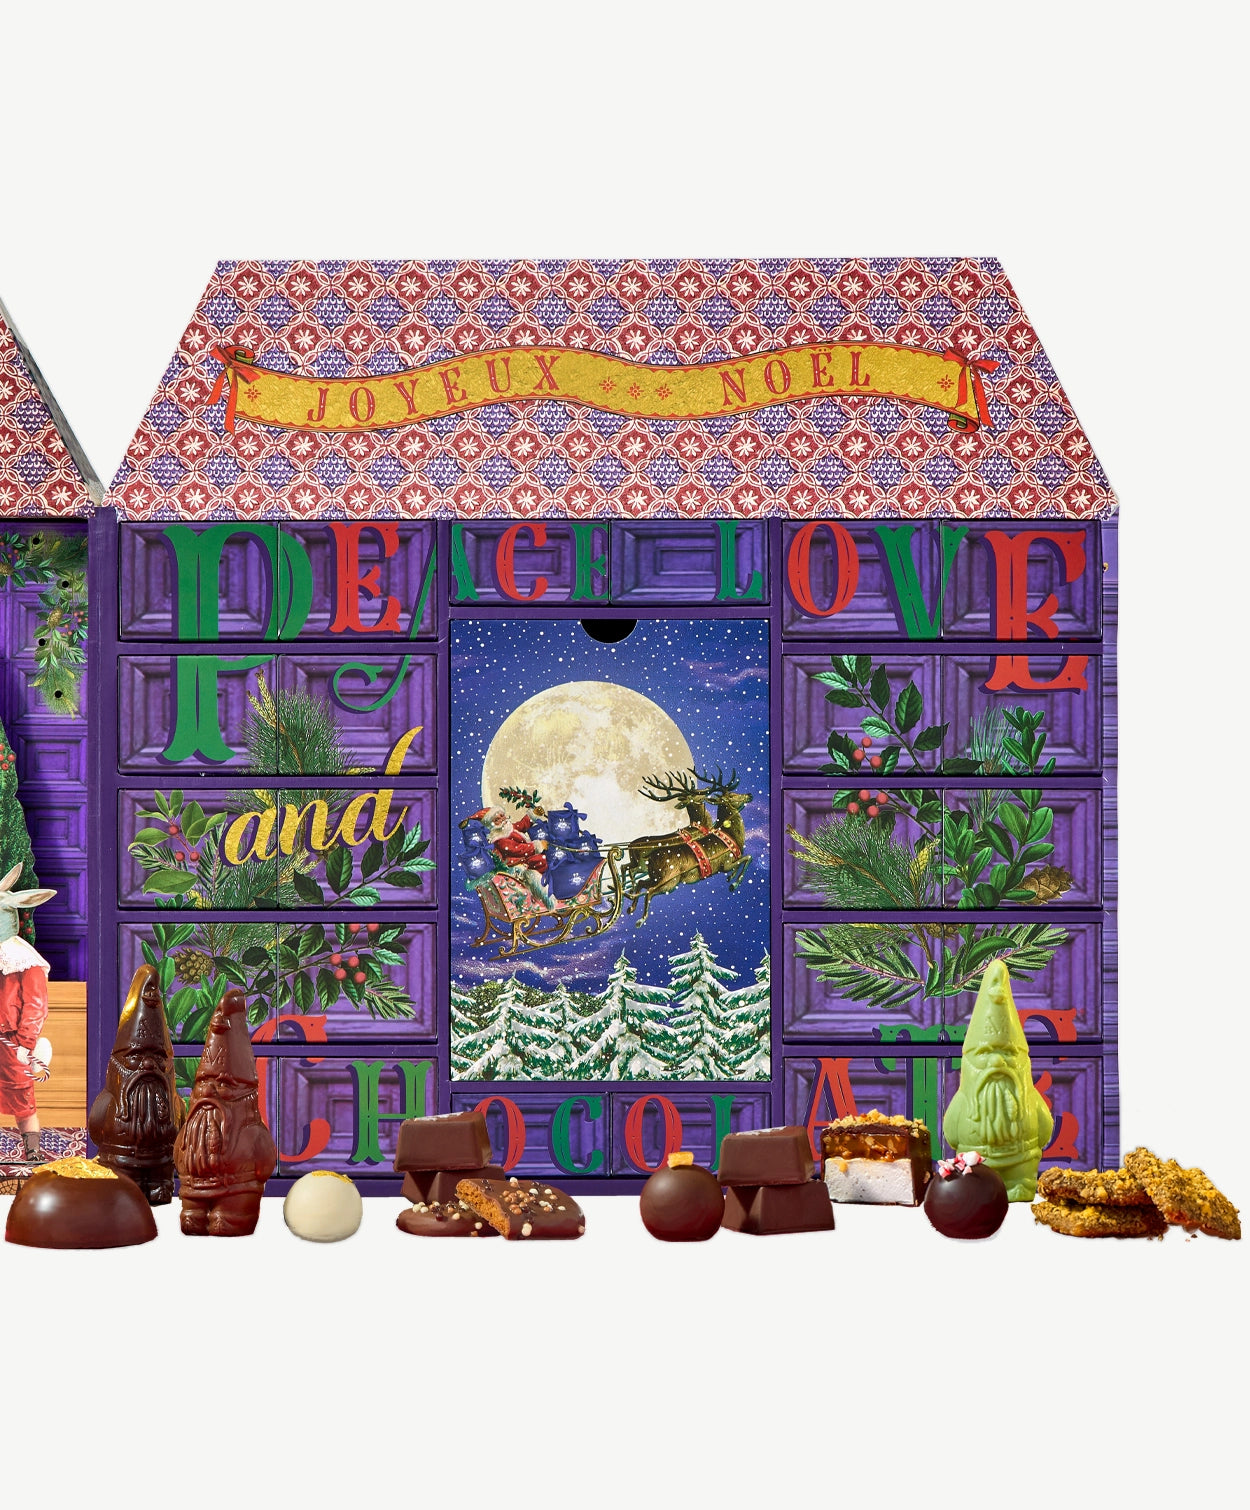 A Vosges Advent calendar sits open displaying several drawers of holiday confections surrounding an image of Santa and his sleigh flying infront a large full moon..